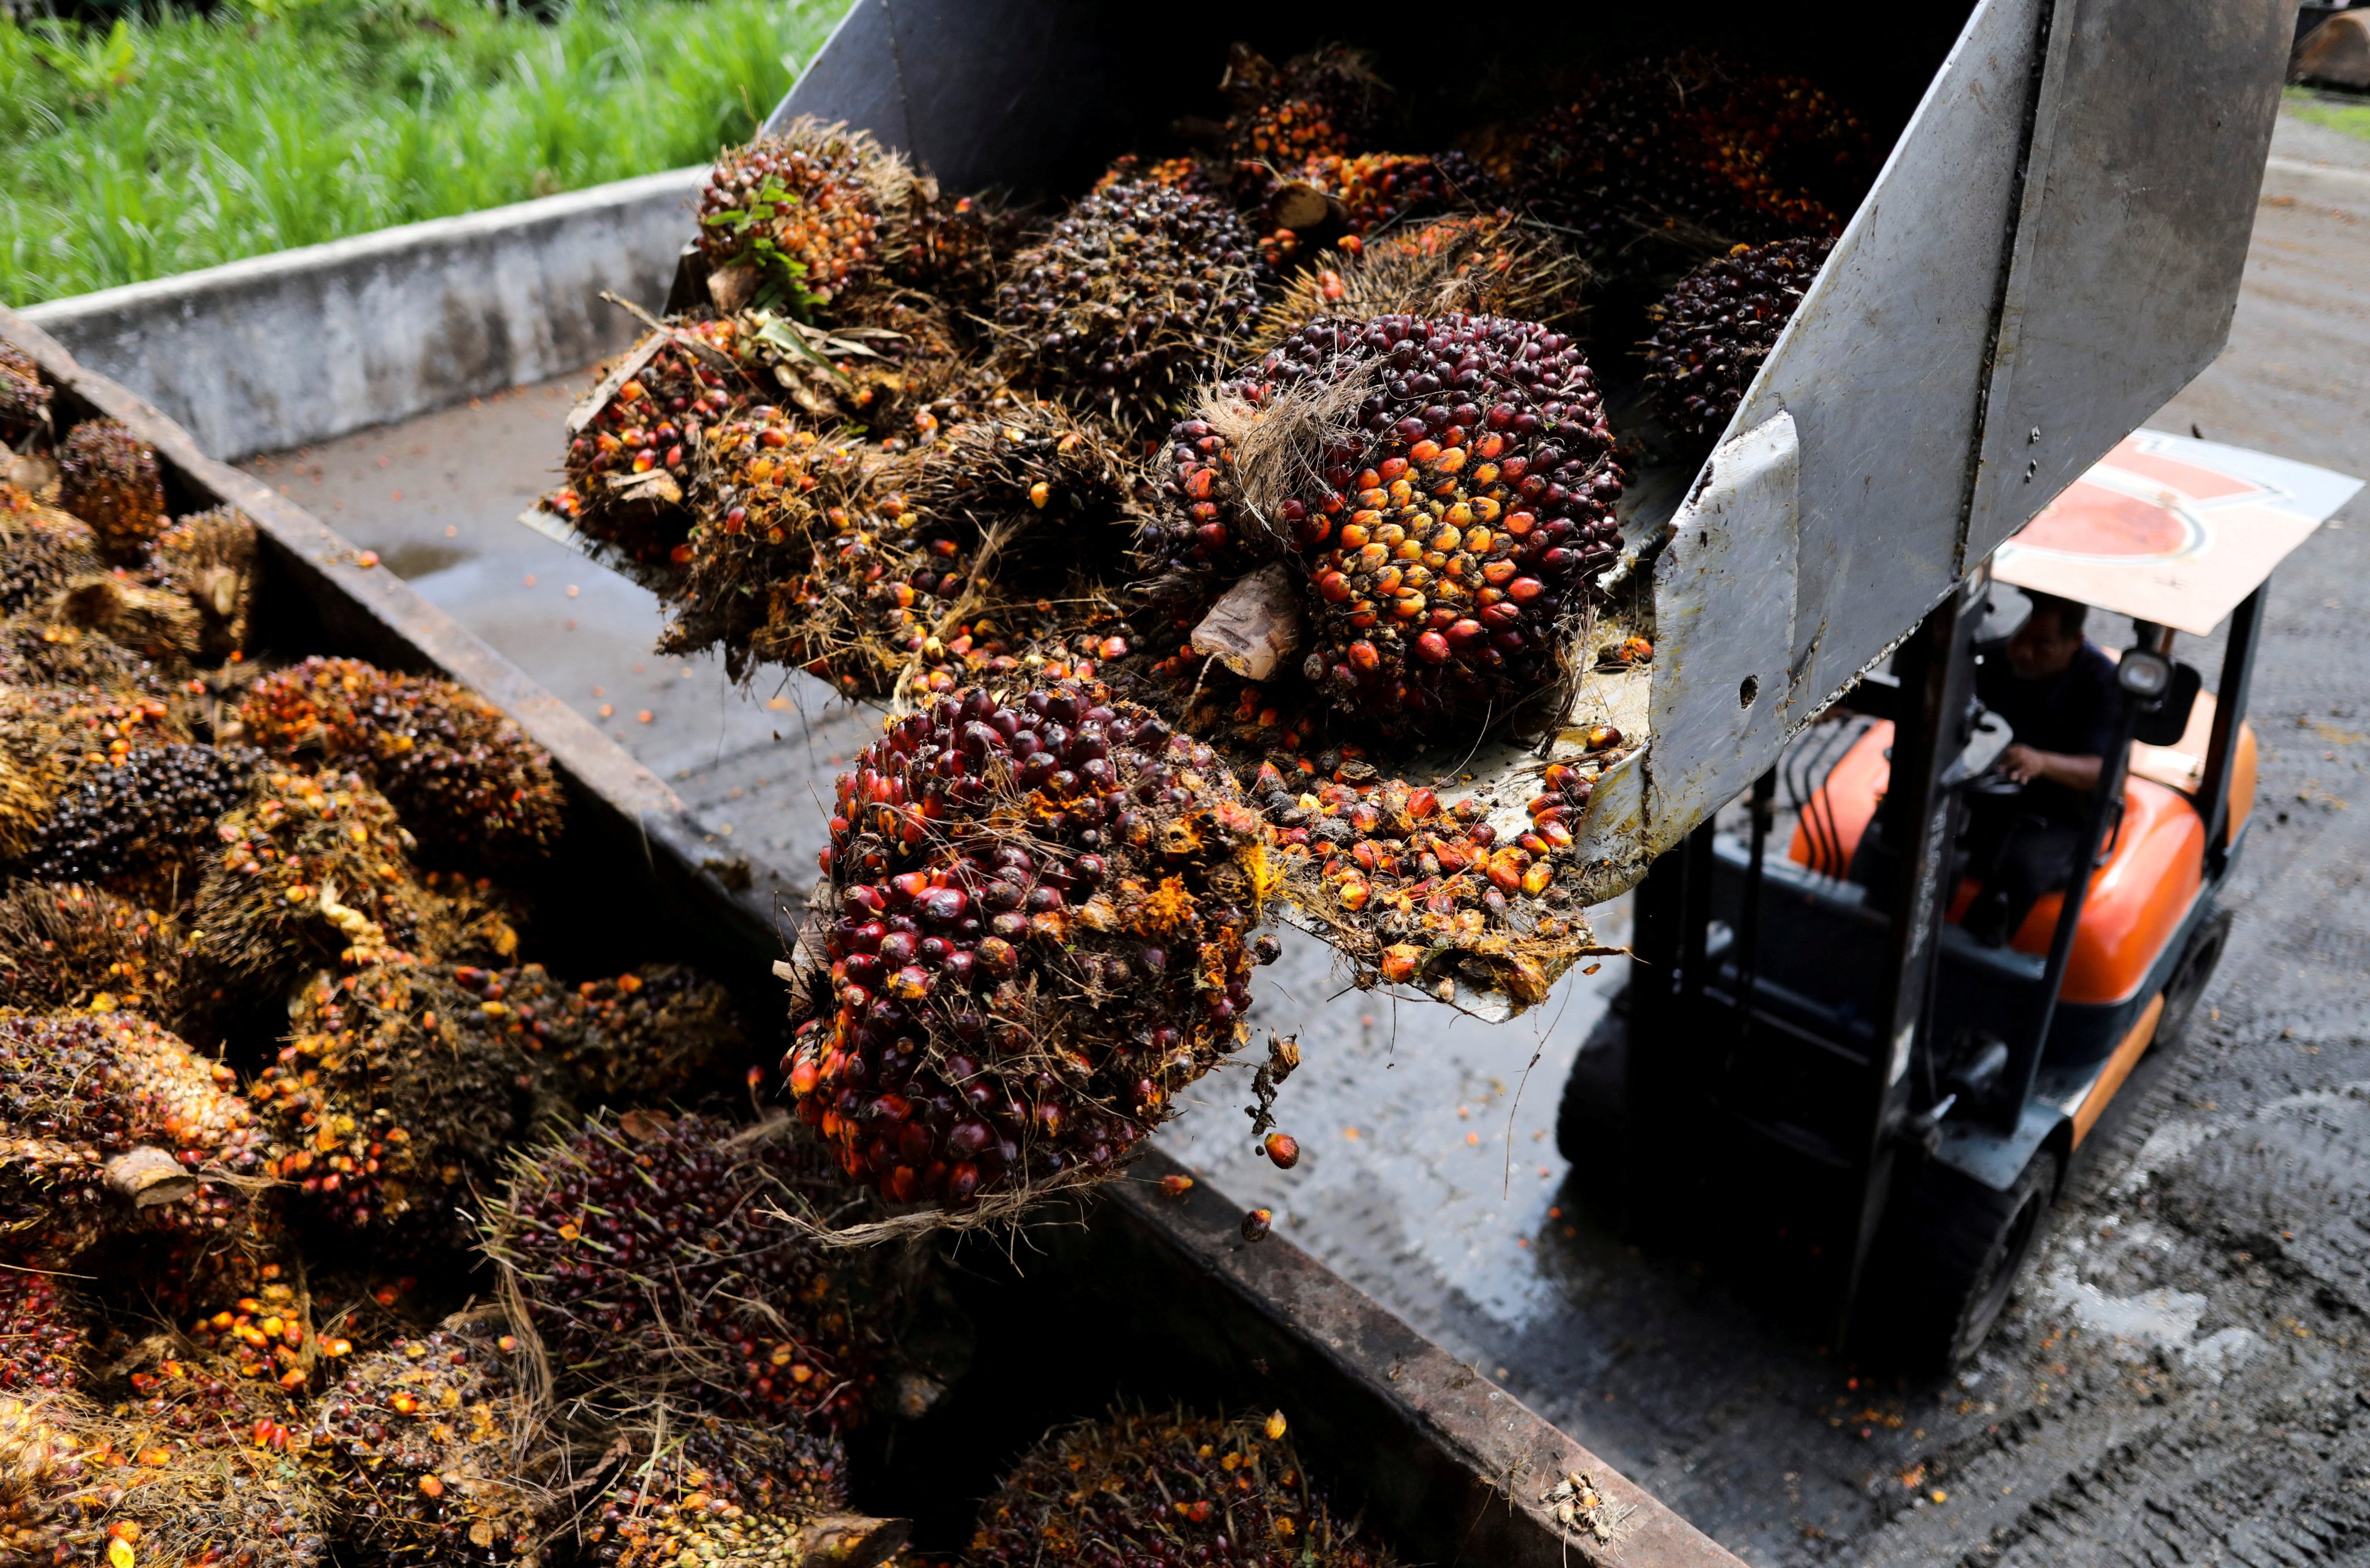 Fresh bunches of oil palm fruit harvested from smallholders’ plantations are loaded into a truck in Selangor, Malaysia, to be sent for processing. Photo: Reuters